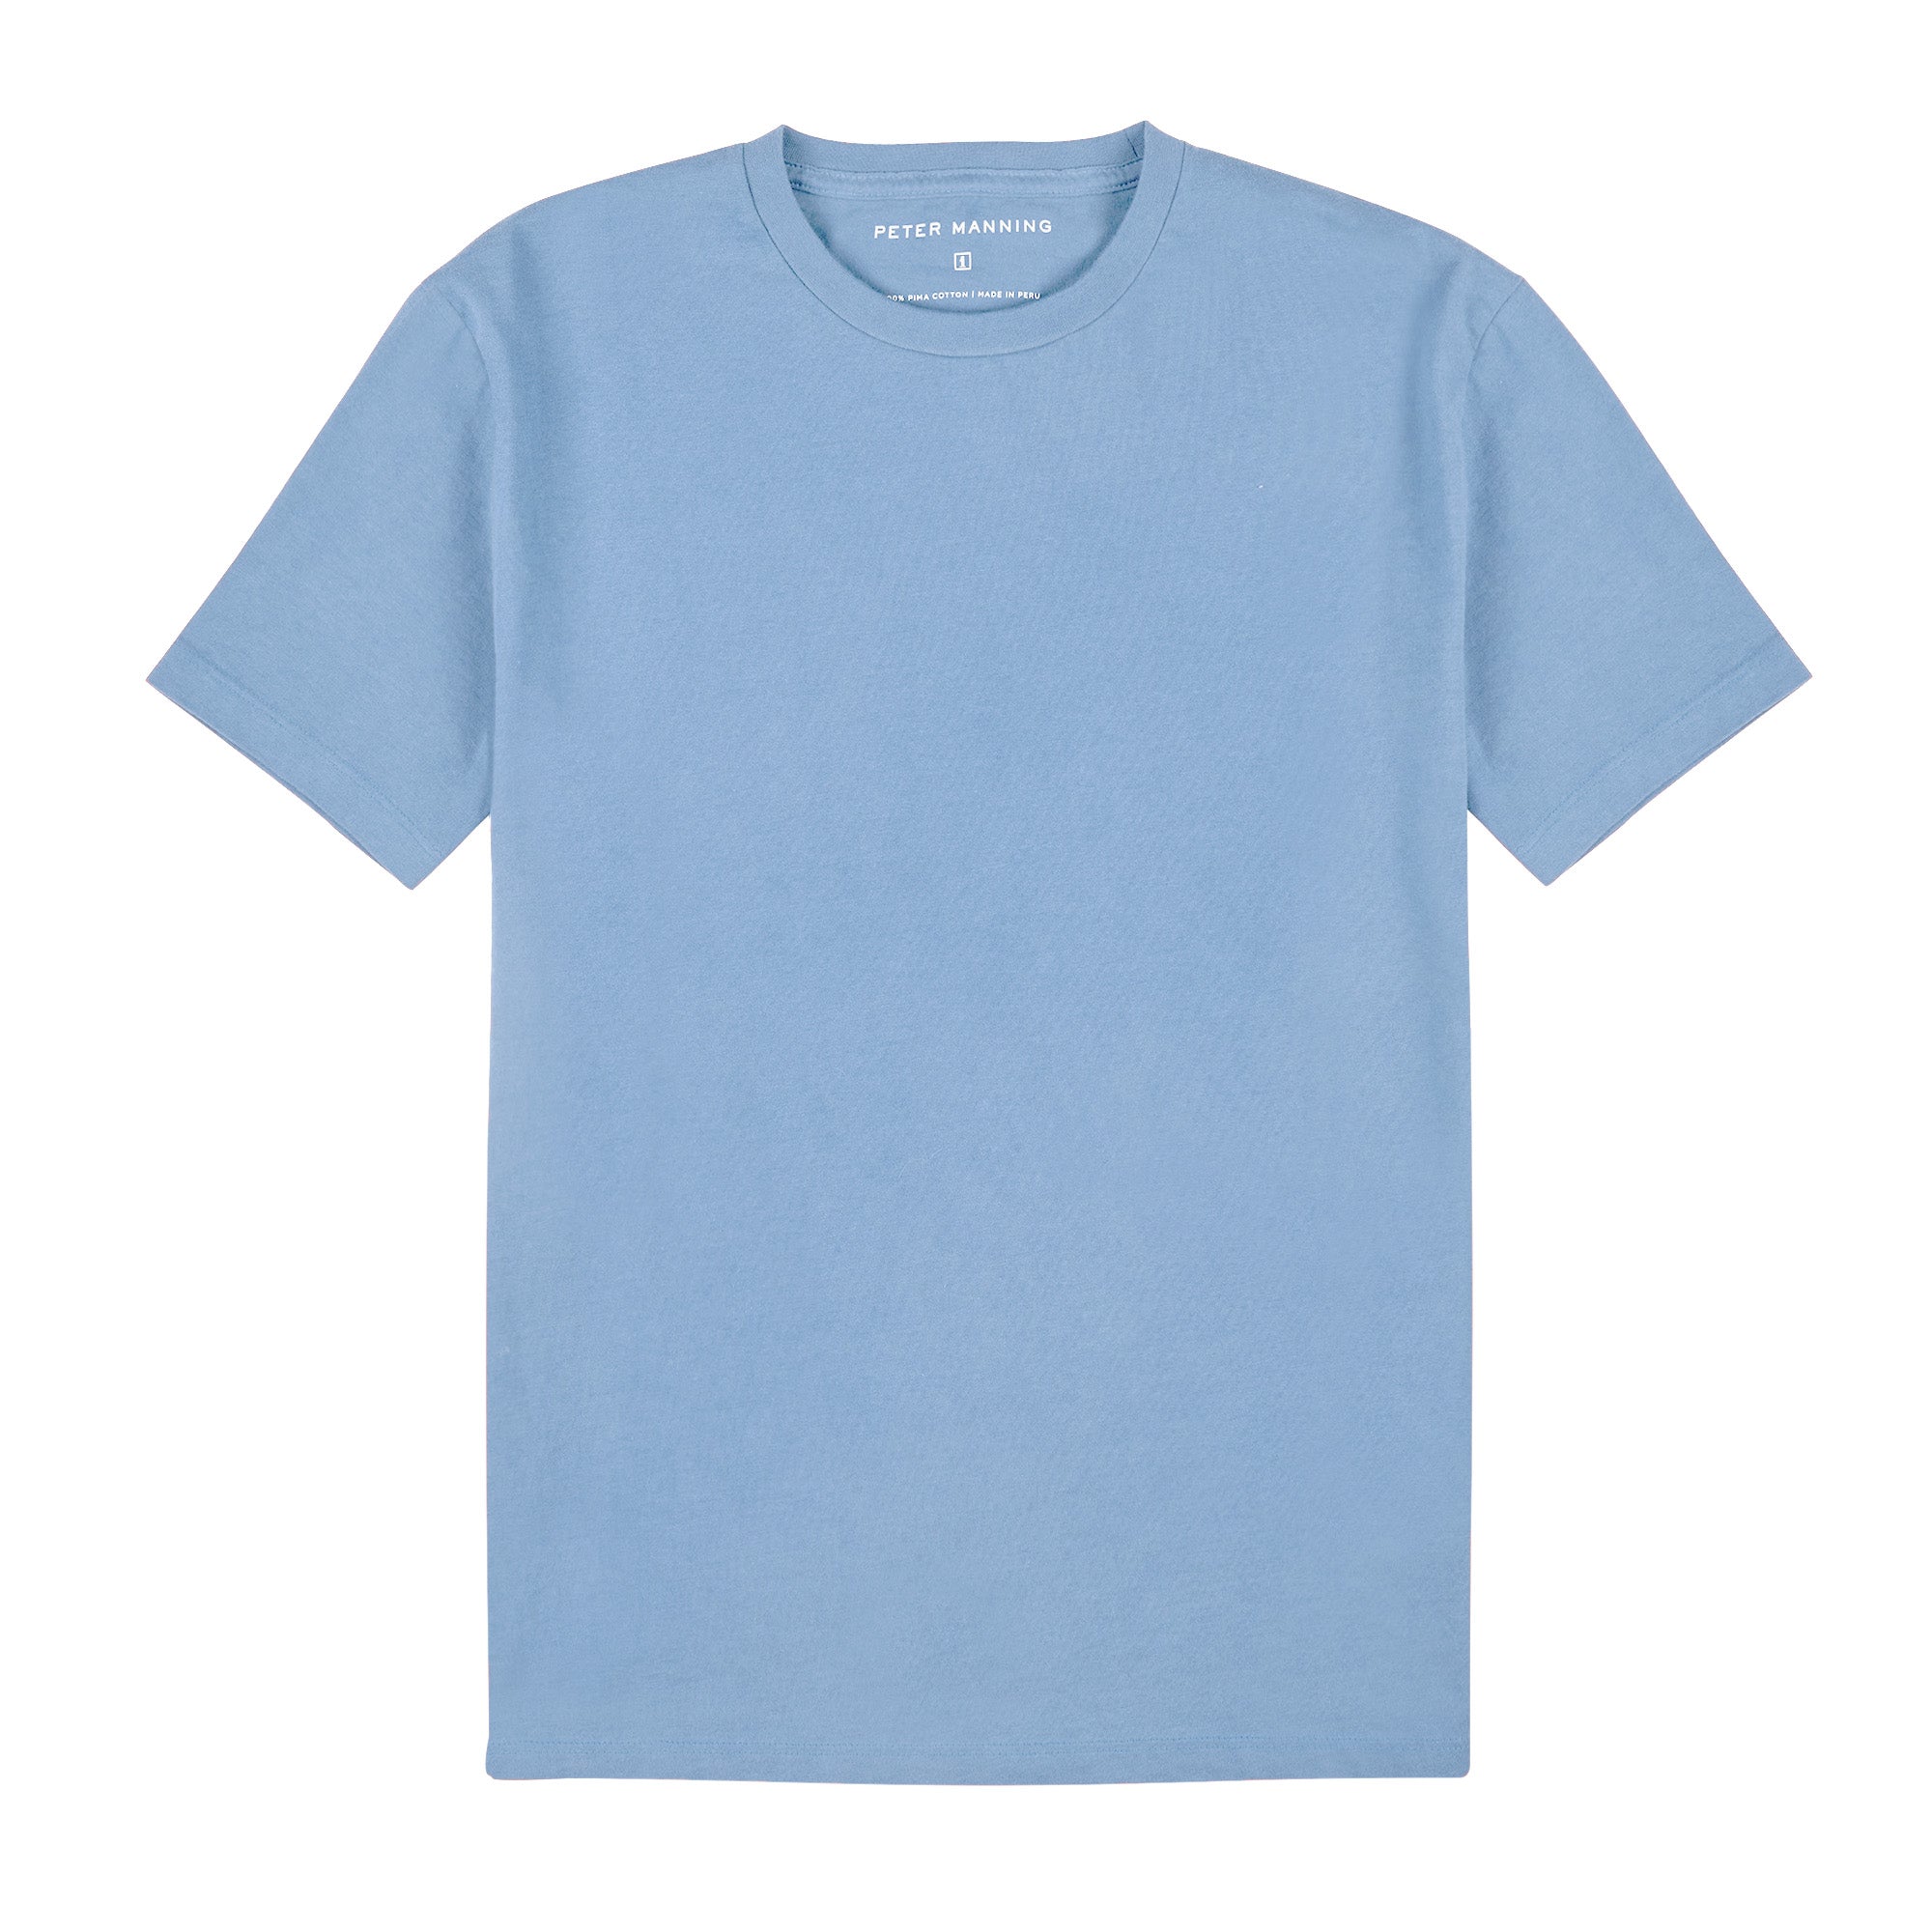 Vintage Crew T-Shirt, Pale Blue | Peter Manning NYC